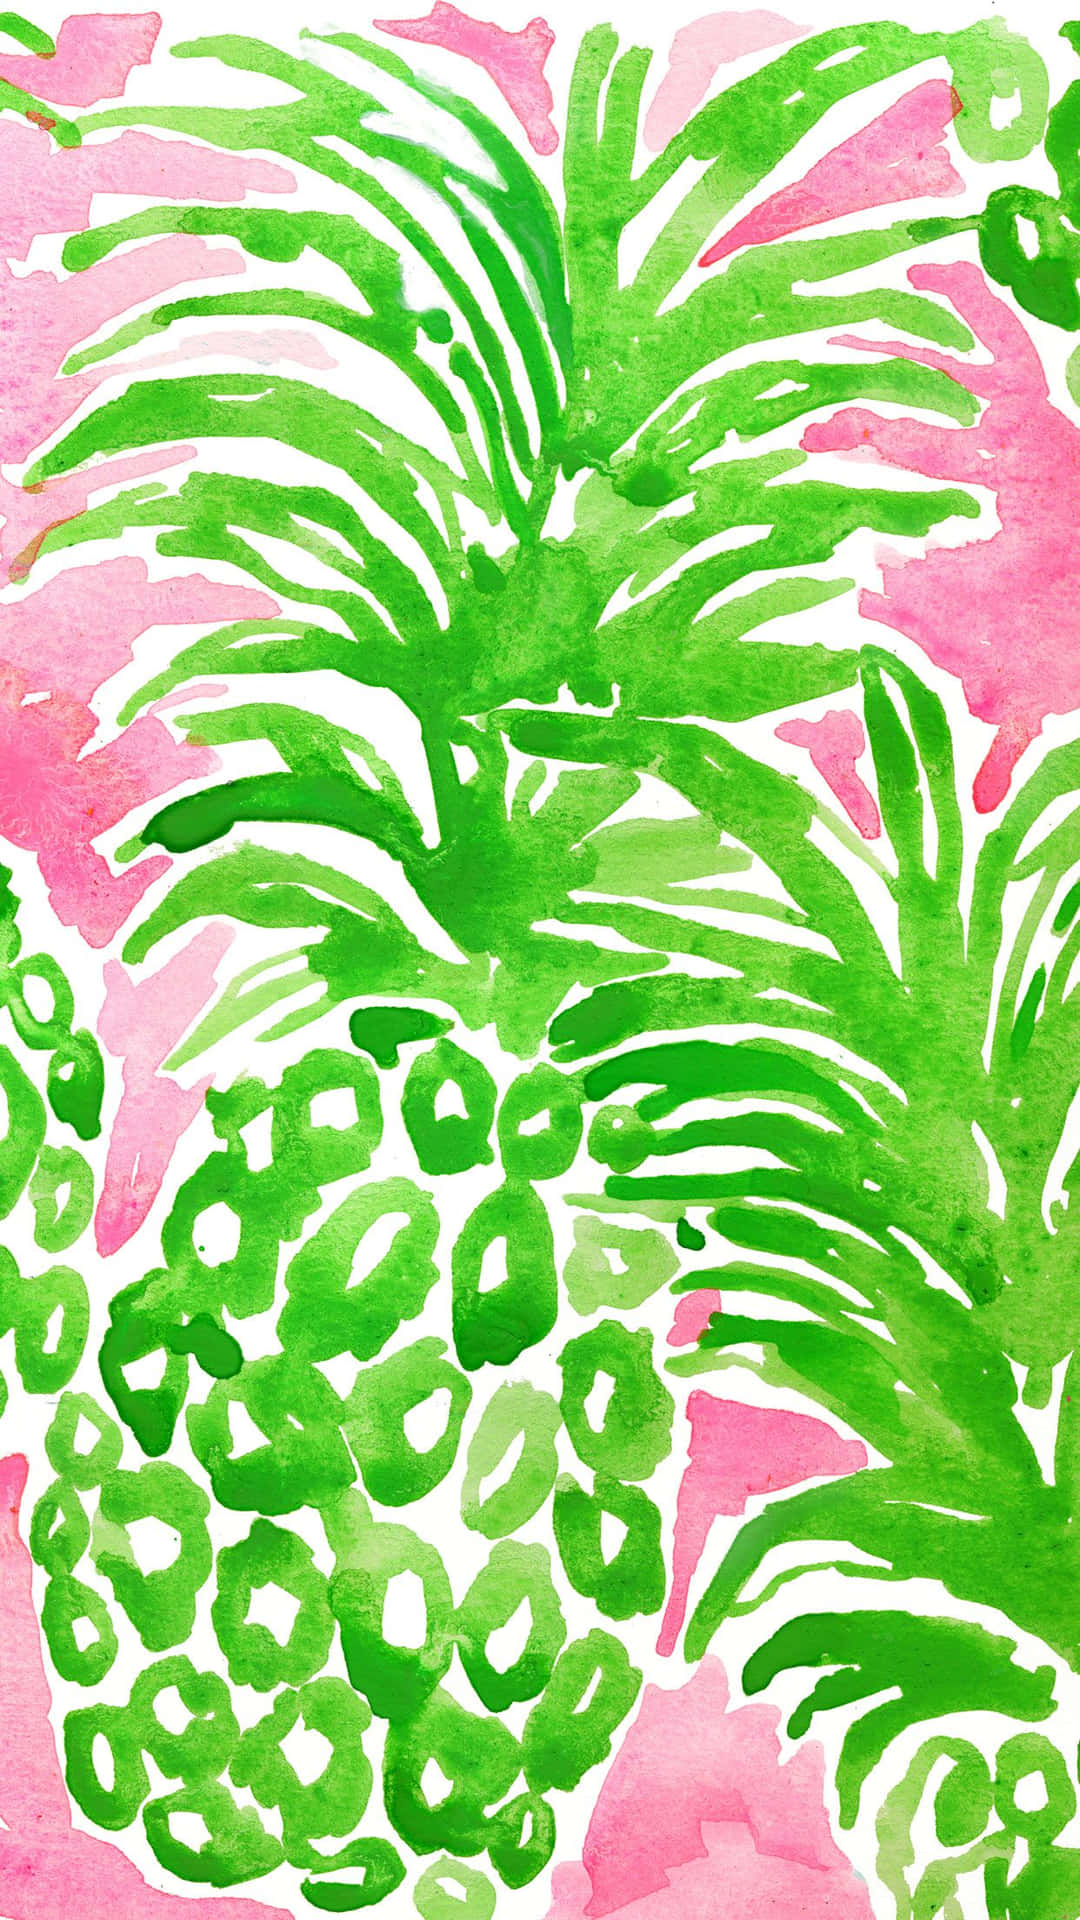 Lilly Pulitzer Iphone Grøn Ananas Tapet Wallpaper